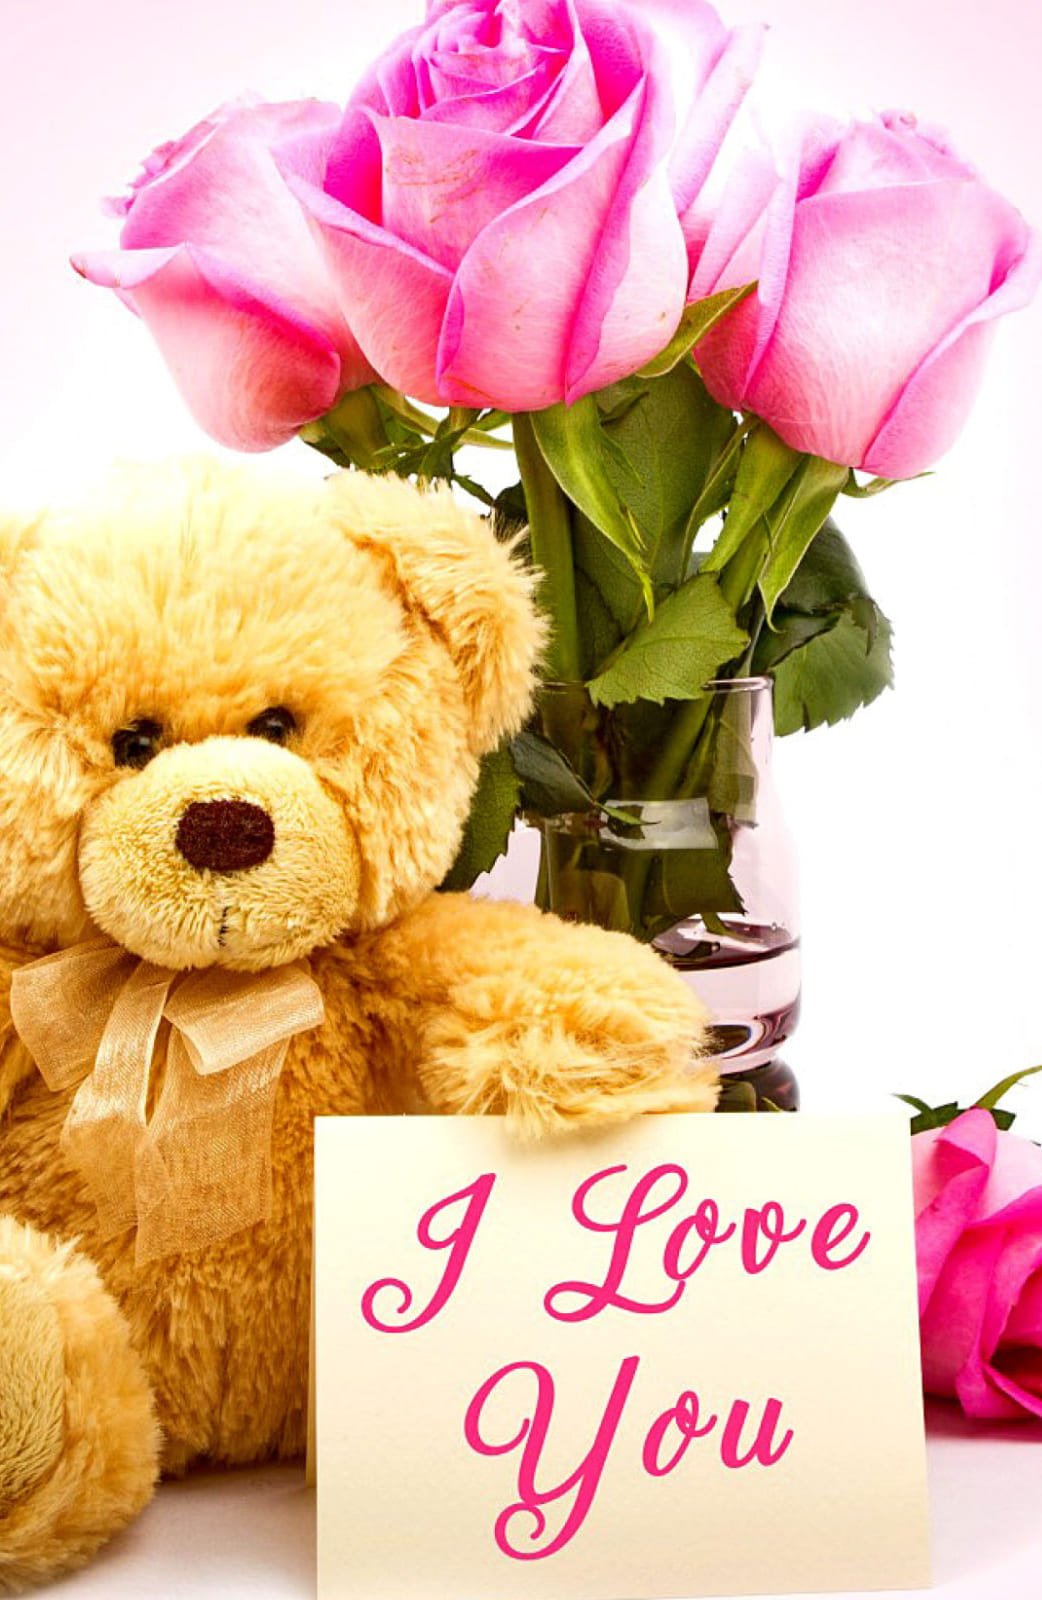 HD wallpaper valentines cards Valentines Day Teddy Bear pink roses i love you